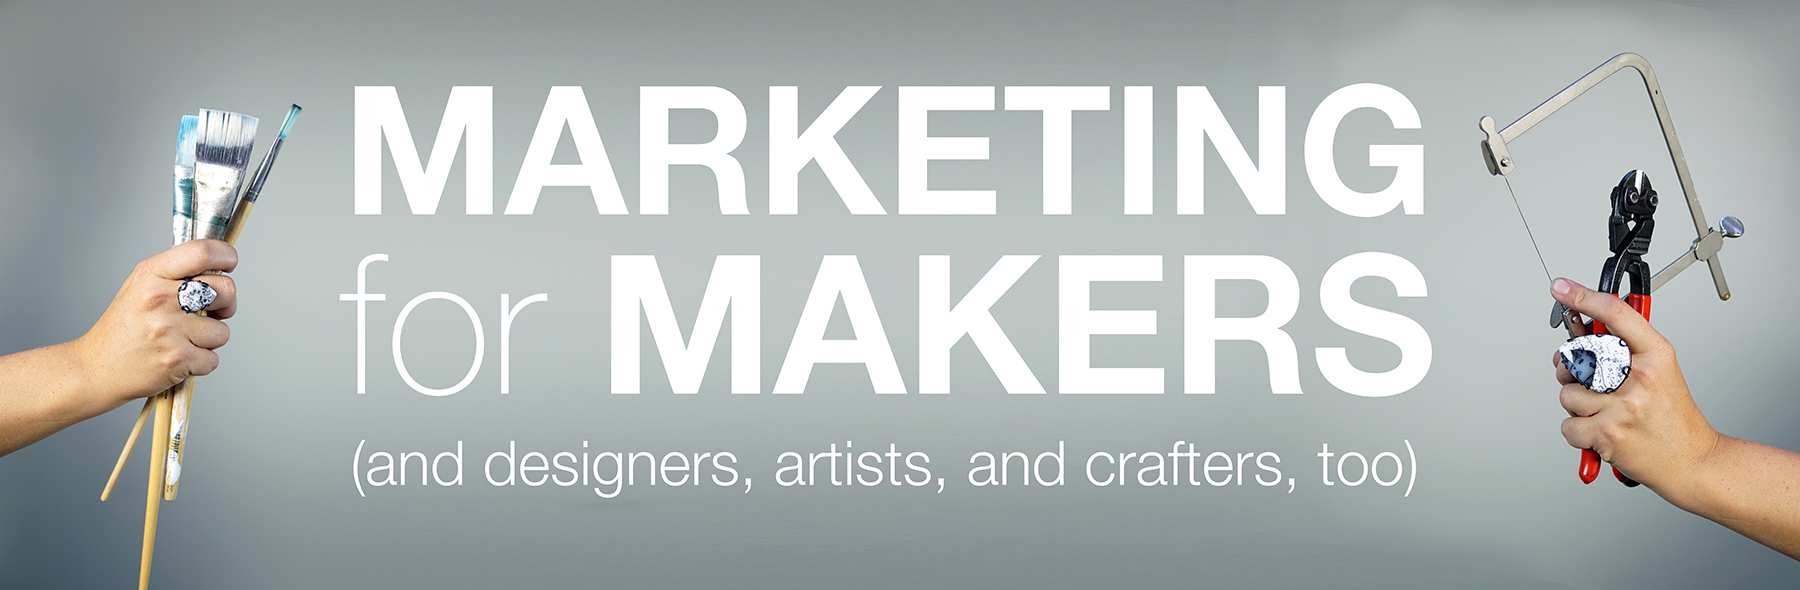 Marketing for Makers course